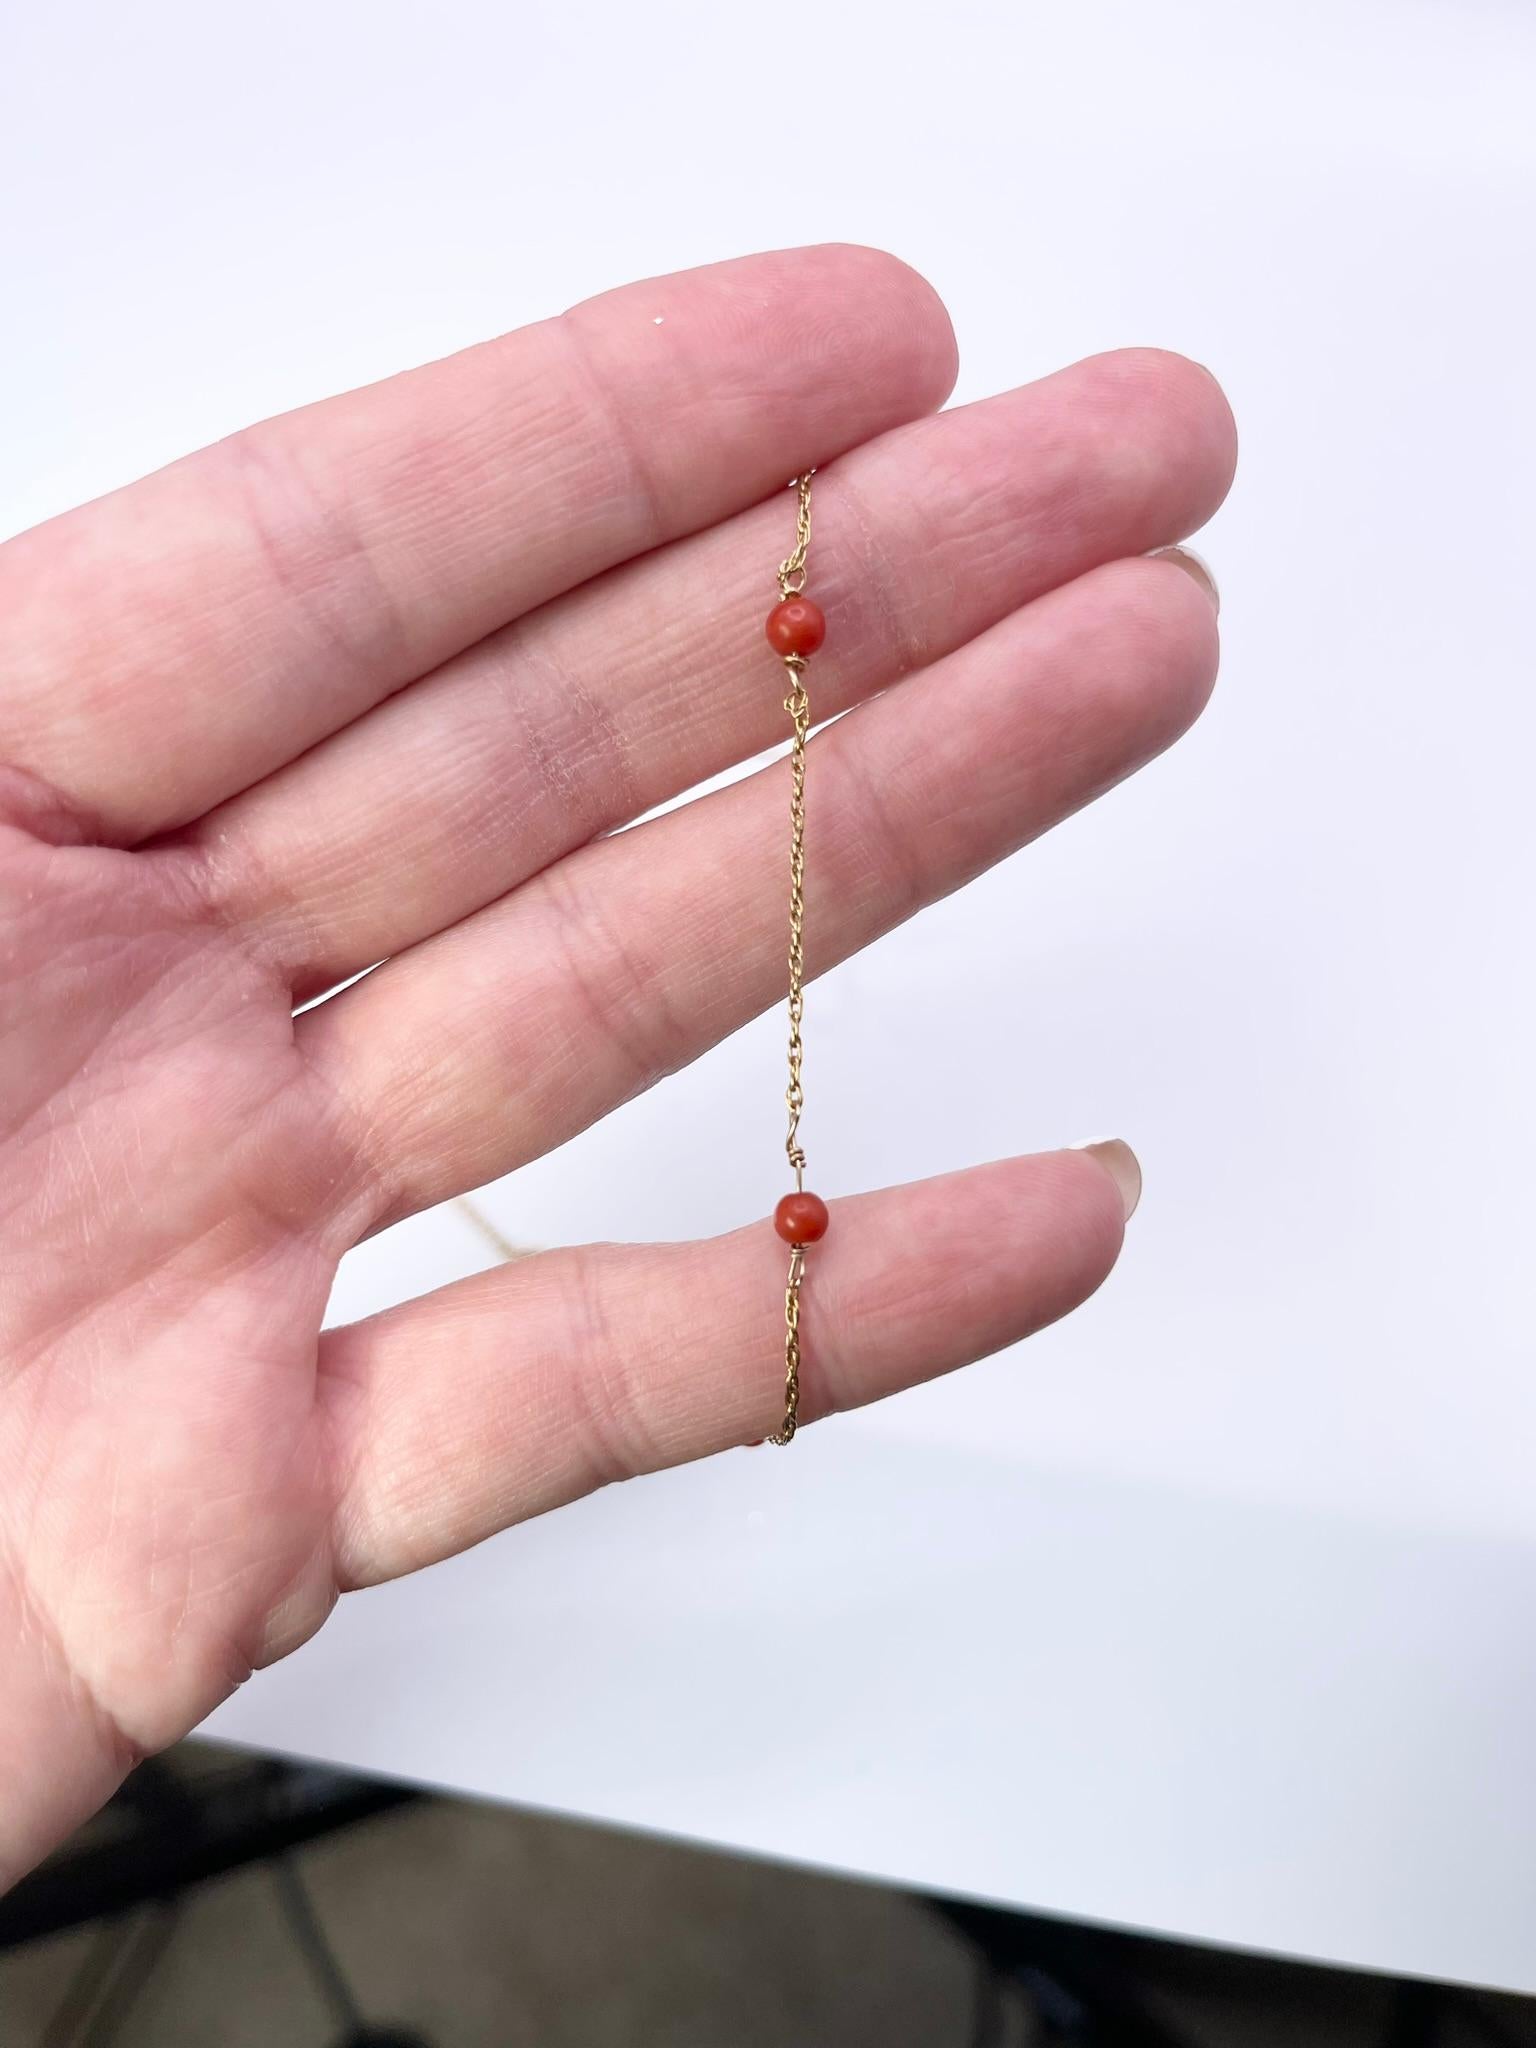 Rare natural undyed coral beads made in 14KT yellow gold yard necklace. The coral beads touch the skin and many cultures it is believed that coral has tremendous power when it touches the skin of a person! Stunning red necklace ready to ship! Comes